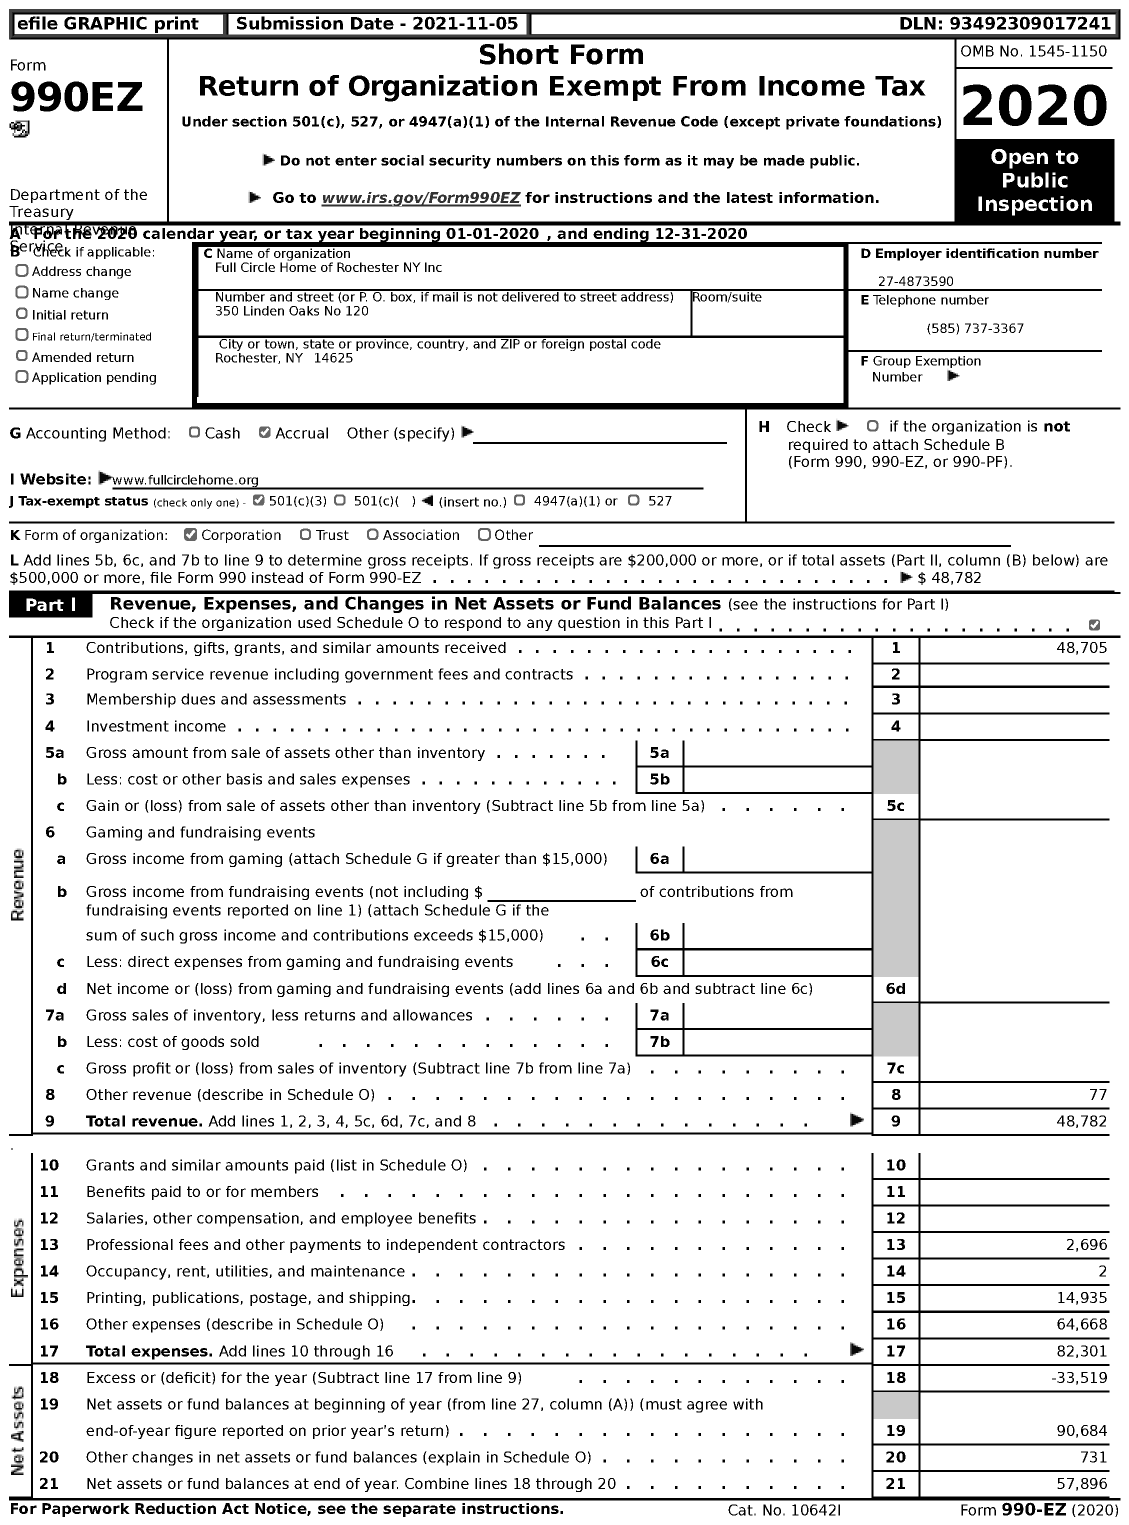 Image of first page of 2020 Form 990EZ for Full Circle Home of Rochester NY